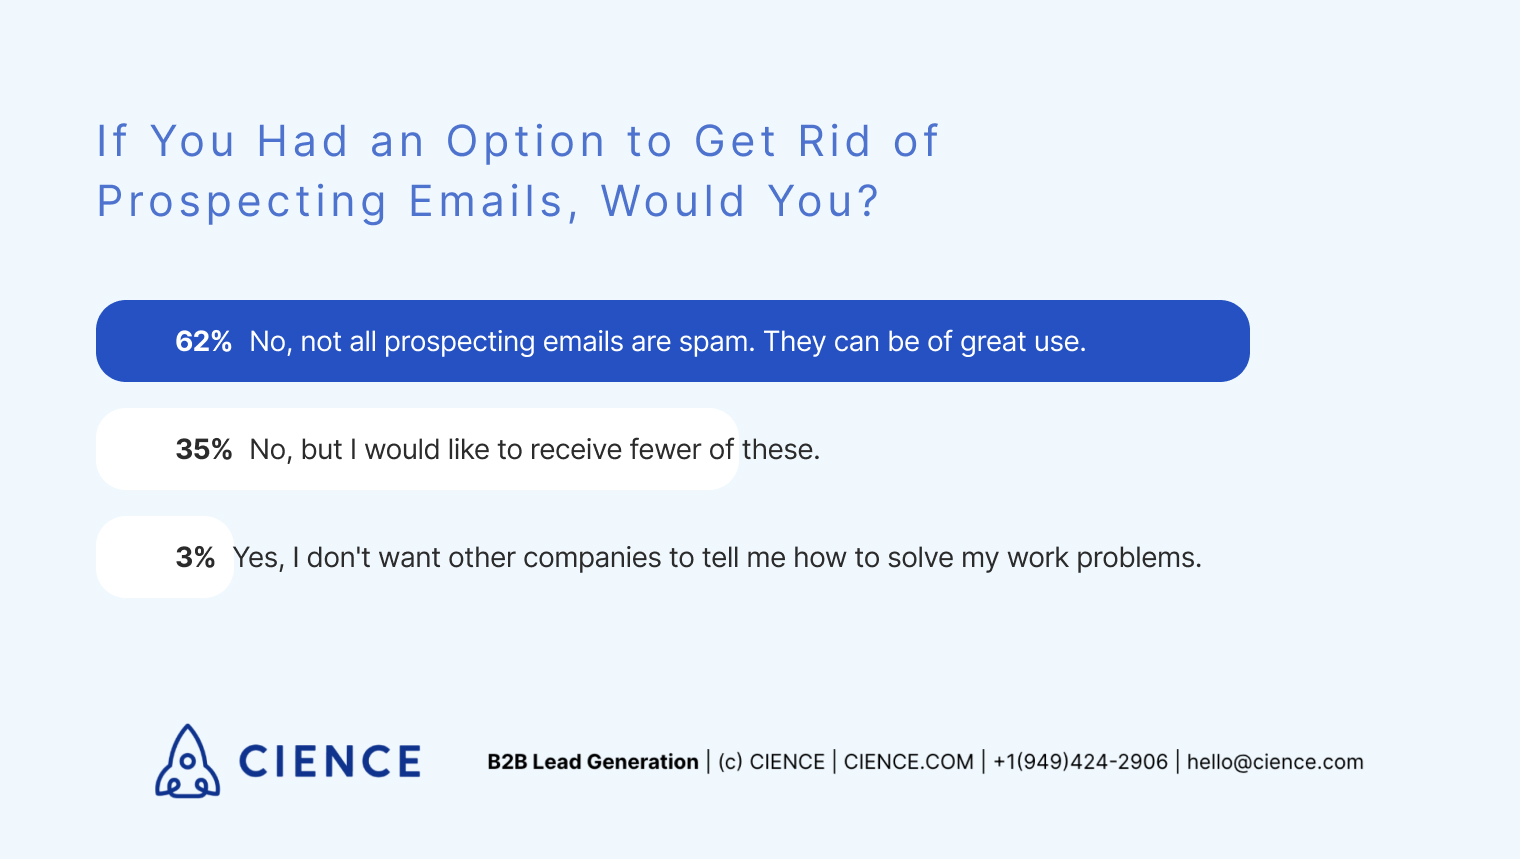 If you had an option to get rid of prospecting emails, would you? Survey